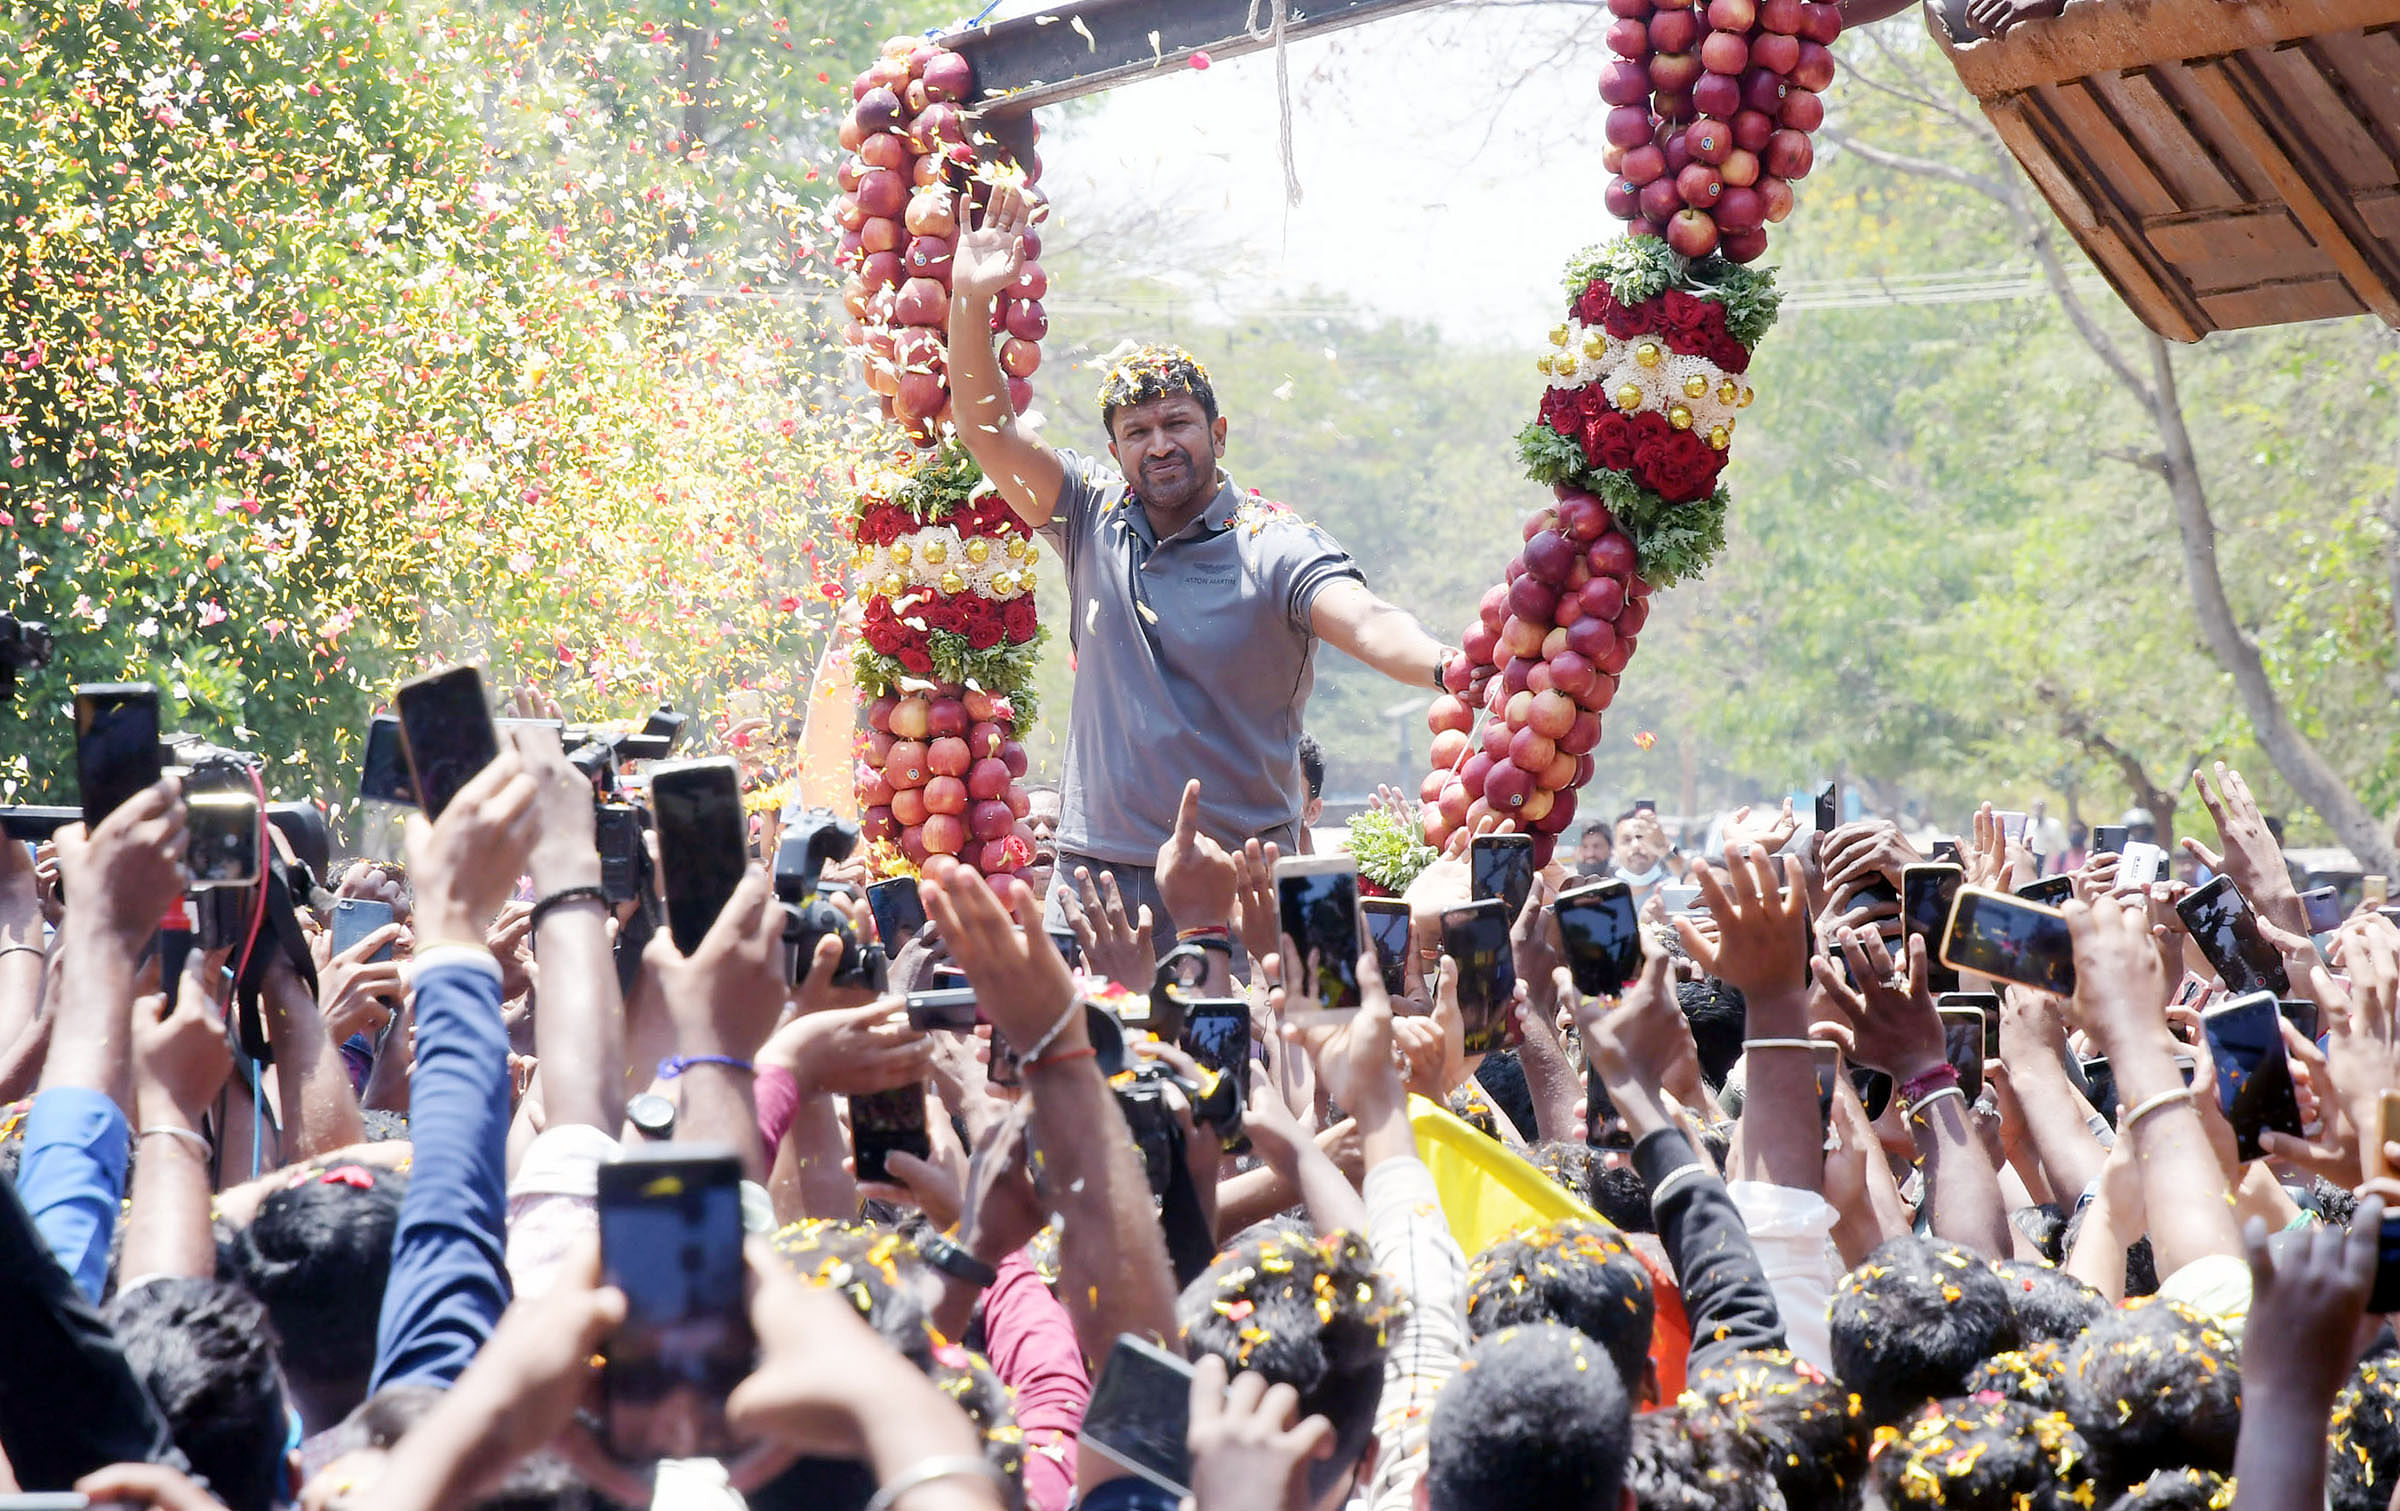 Puneeth Rajkumar is welcomed with a huge garland of apples during the promotion of ‘Yuvarathnaa’ in Mysuru. DH PHOTO